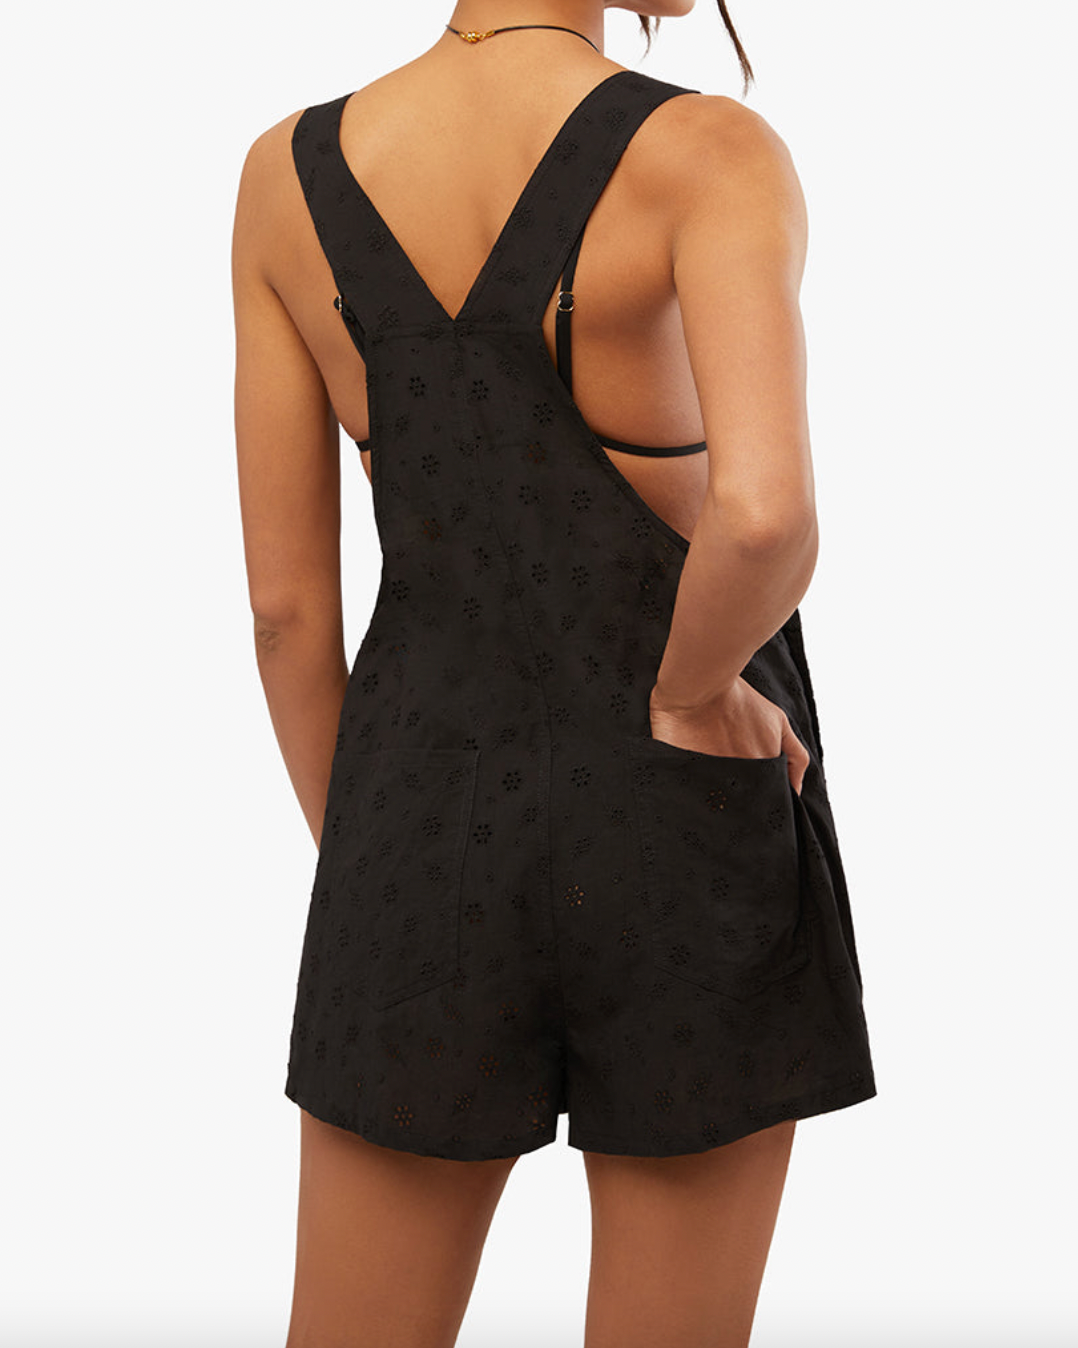 Basic Short Eyelet Overall Black, Romper Dress by Onia | LIT Boutique